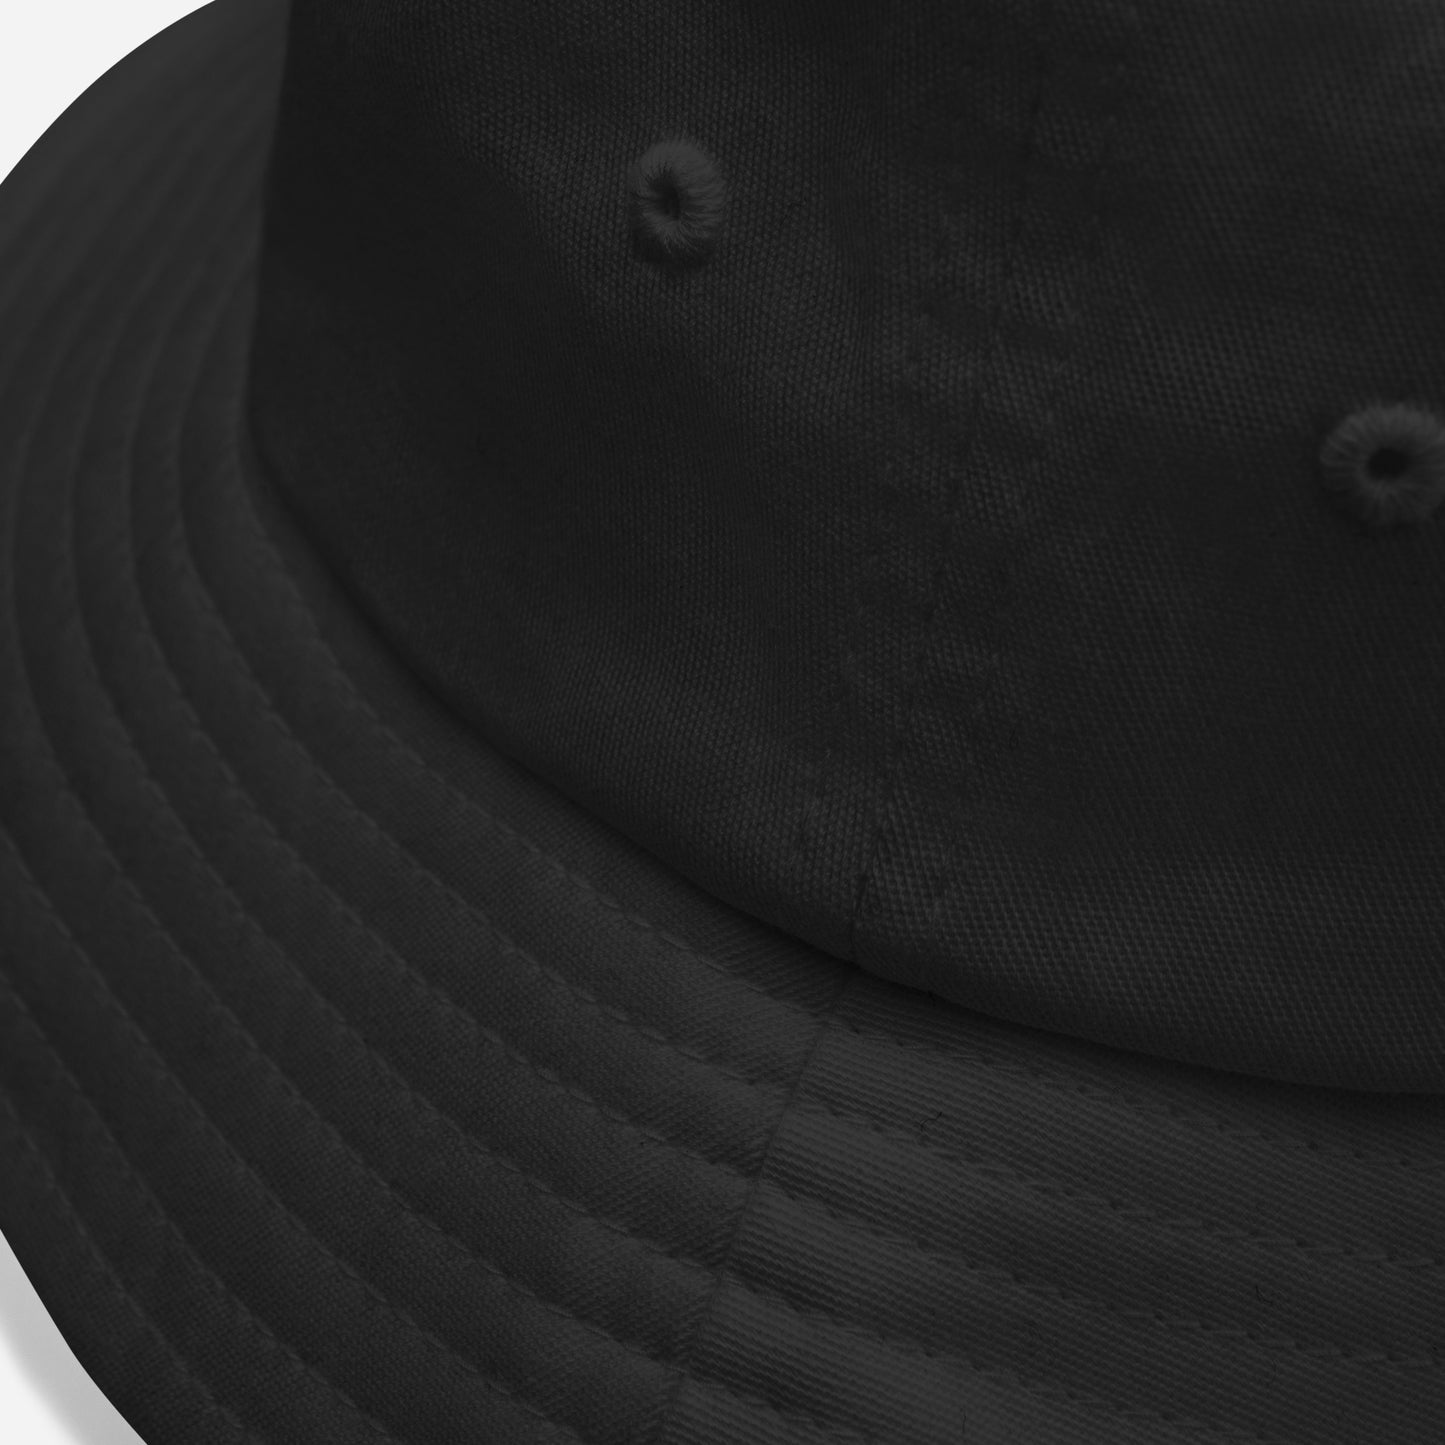 The Snakeboard Pro 2.0 Bucket Hat